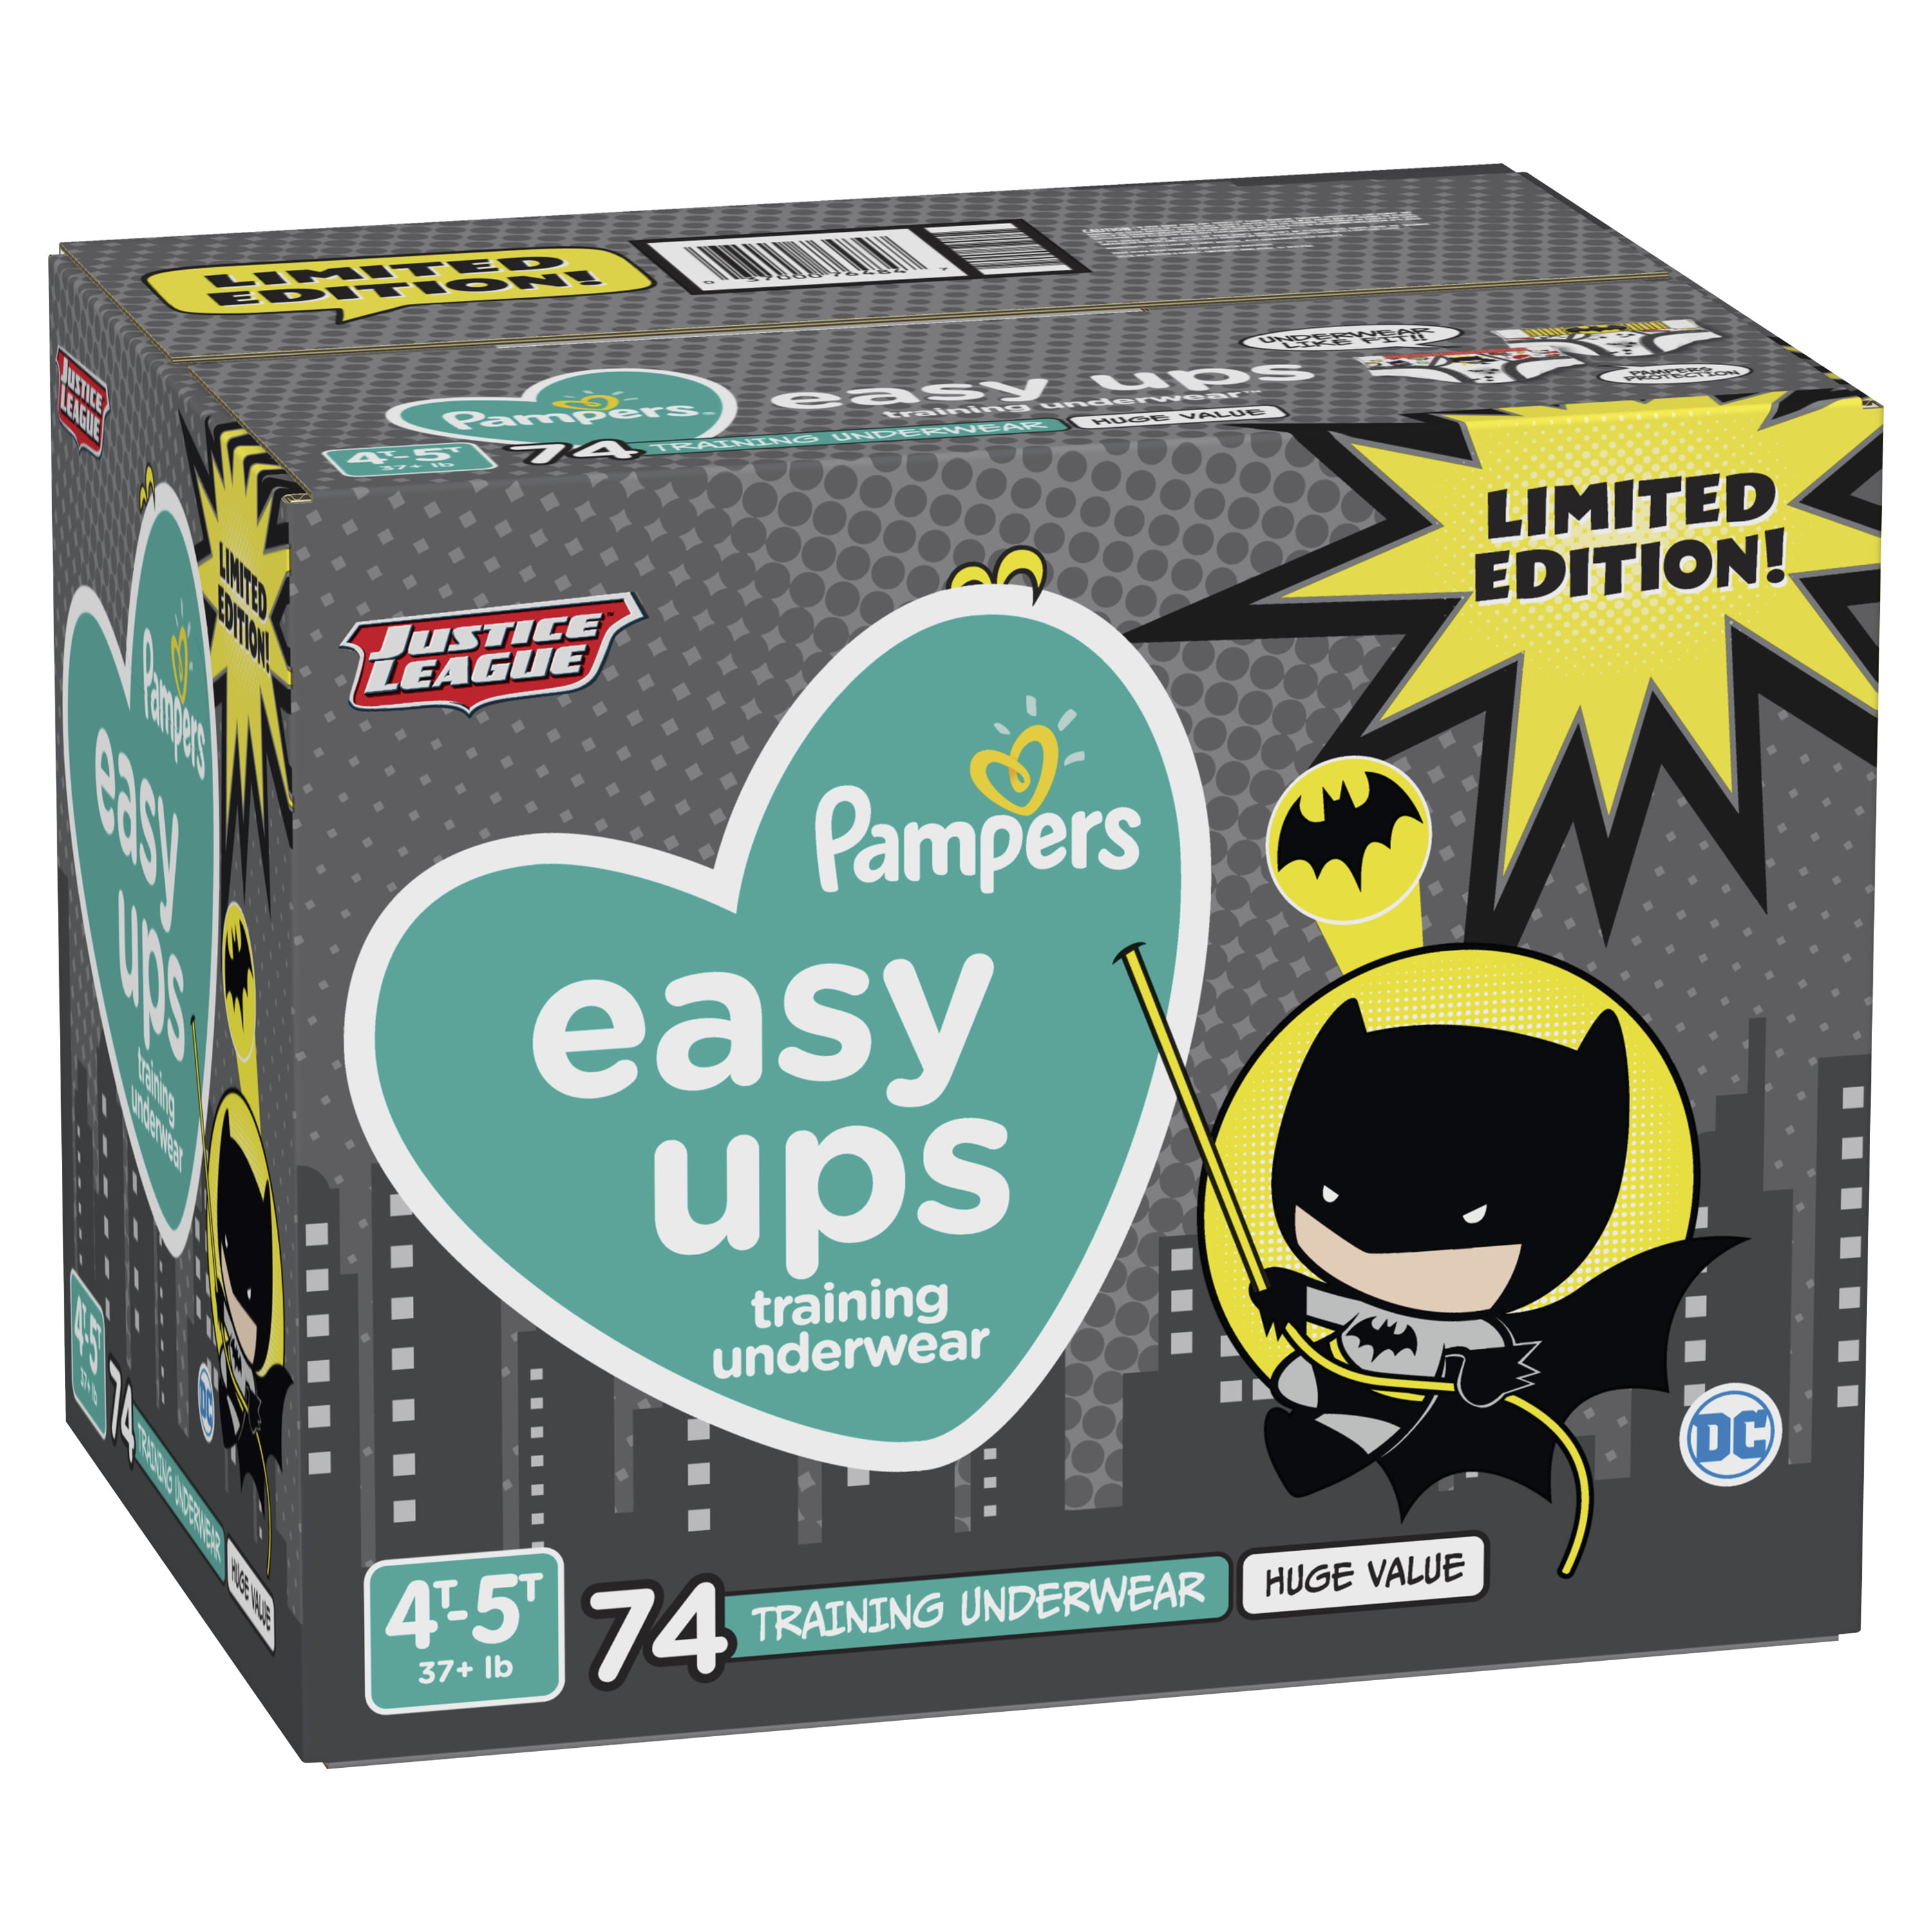 Pampers Easy Ups Training Underwear Boys, Size 4T-5T, 74 Ct 